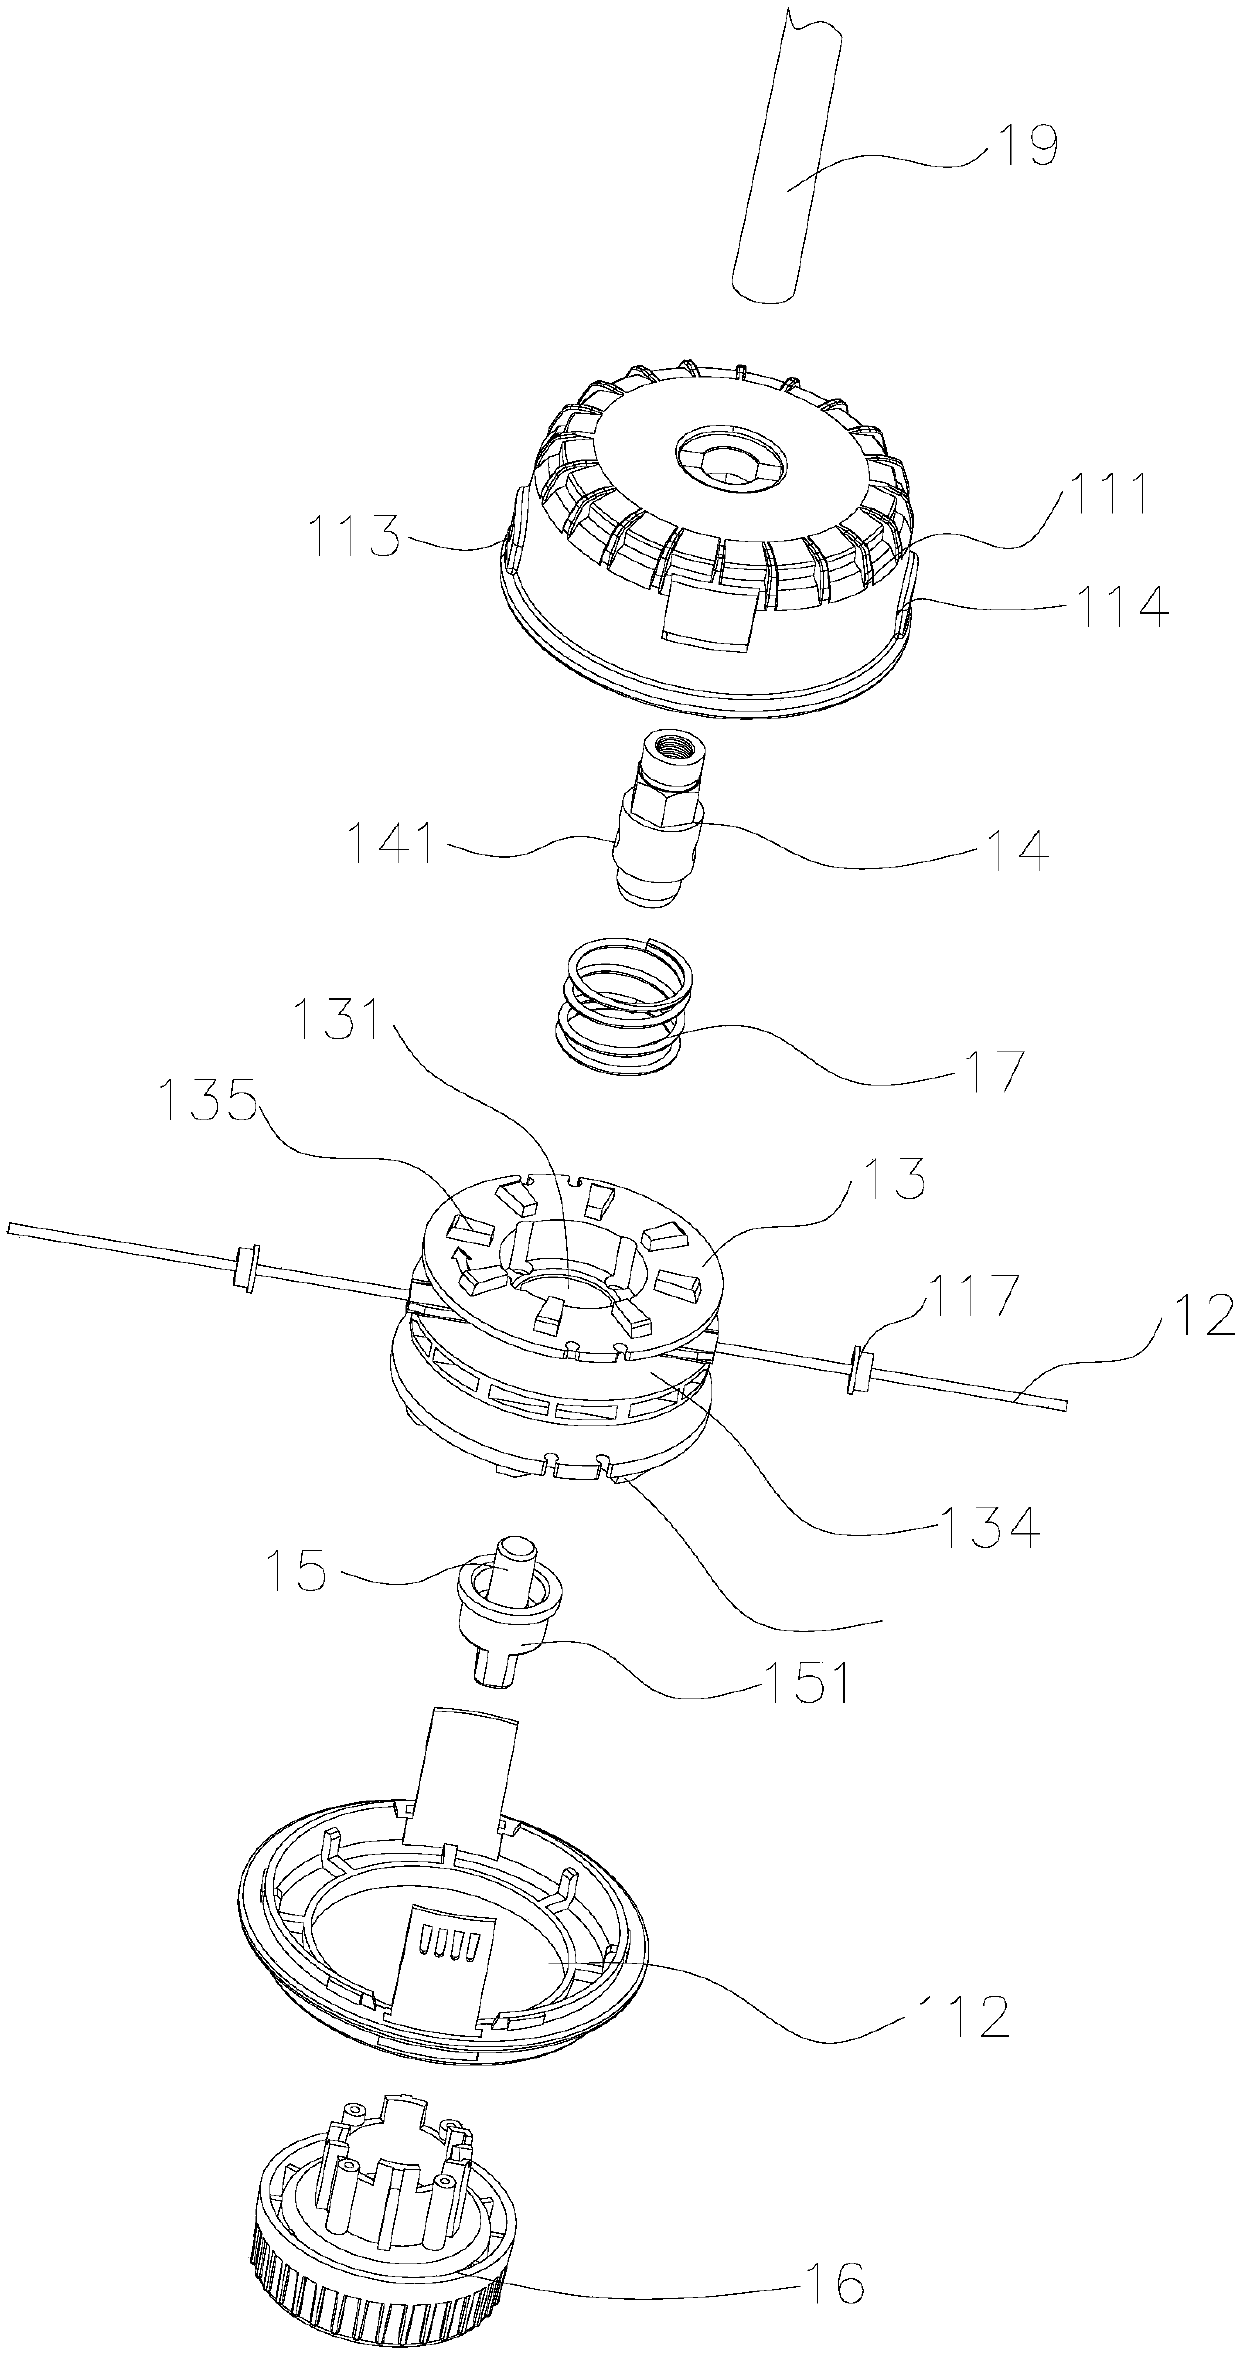 Grass trimming head which is simple to operate and reliable to use and grass trimmer